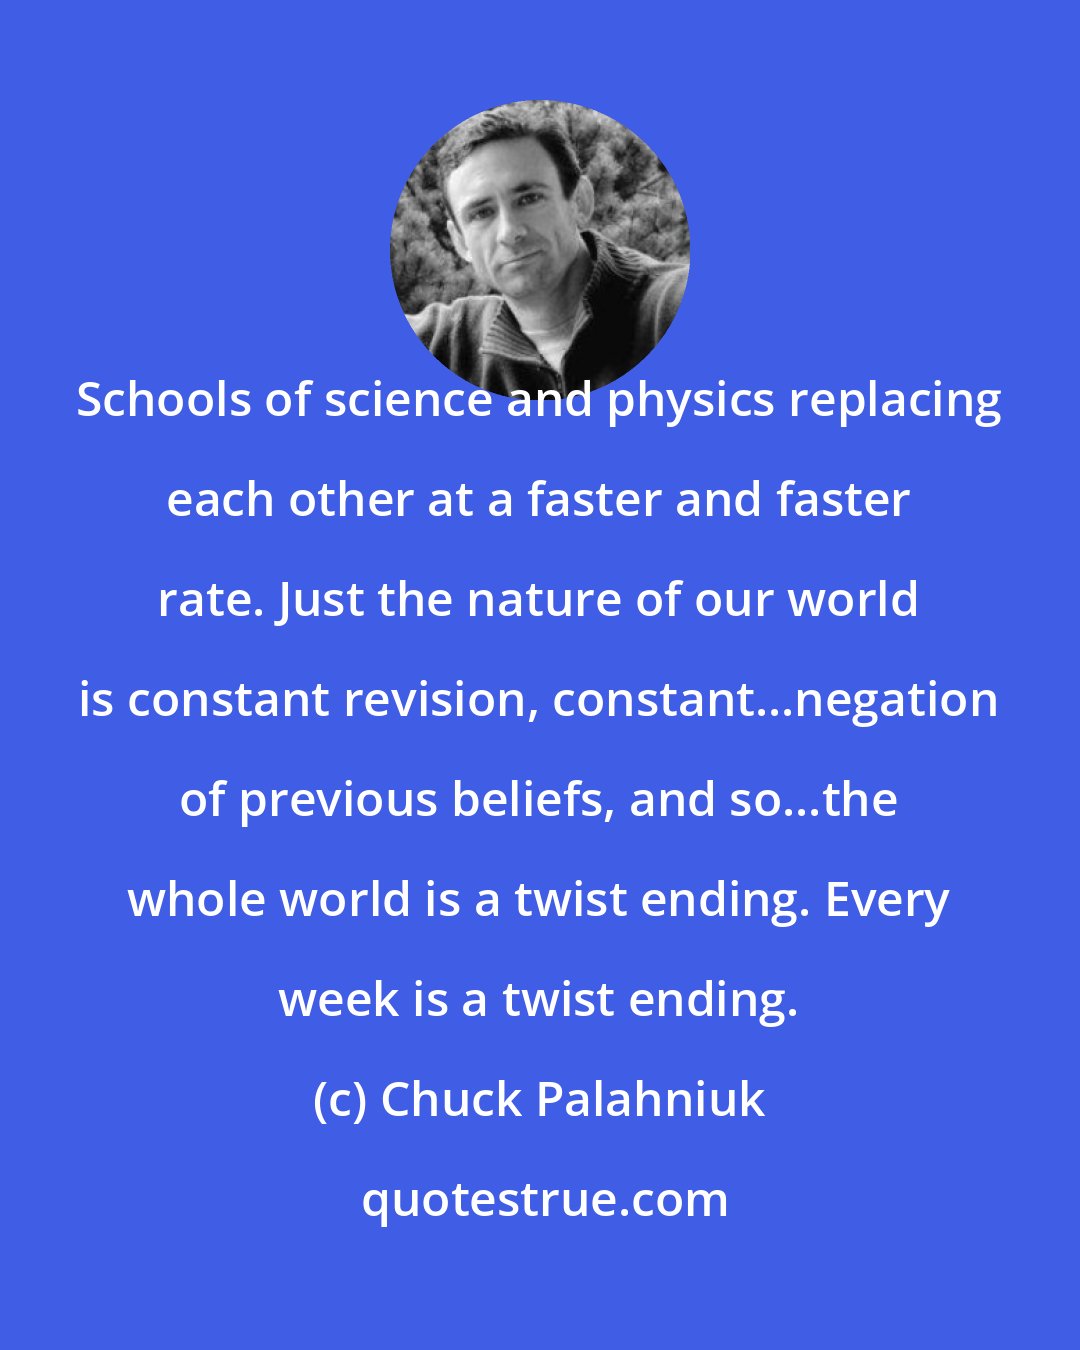 Chuck Palahniuk: Schools of science and physics replacing each other at a faster and faster rate. Just the nature of our world is constant revision, constant...negation of previous beliefs, and so...the whole world is a twist ending. Every week is a twist ending.